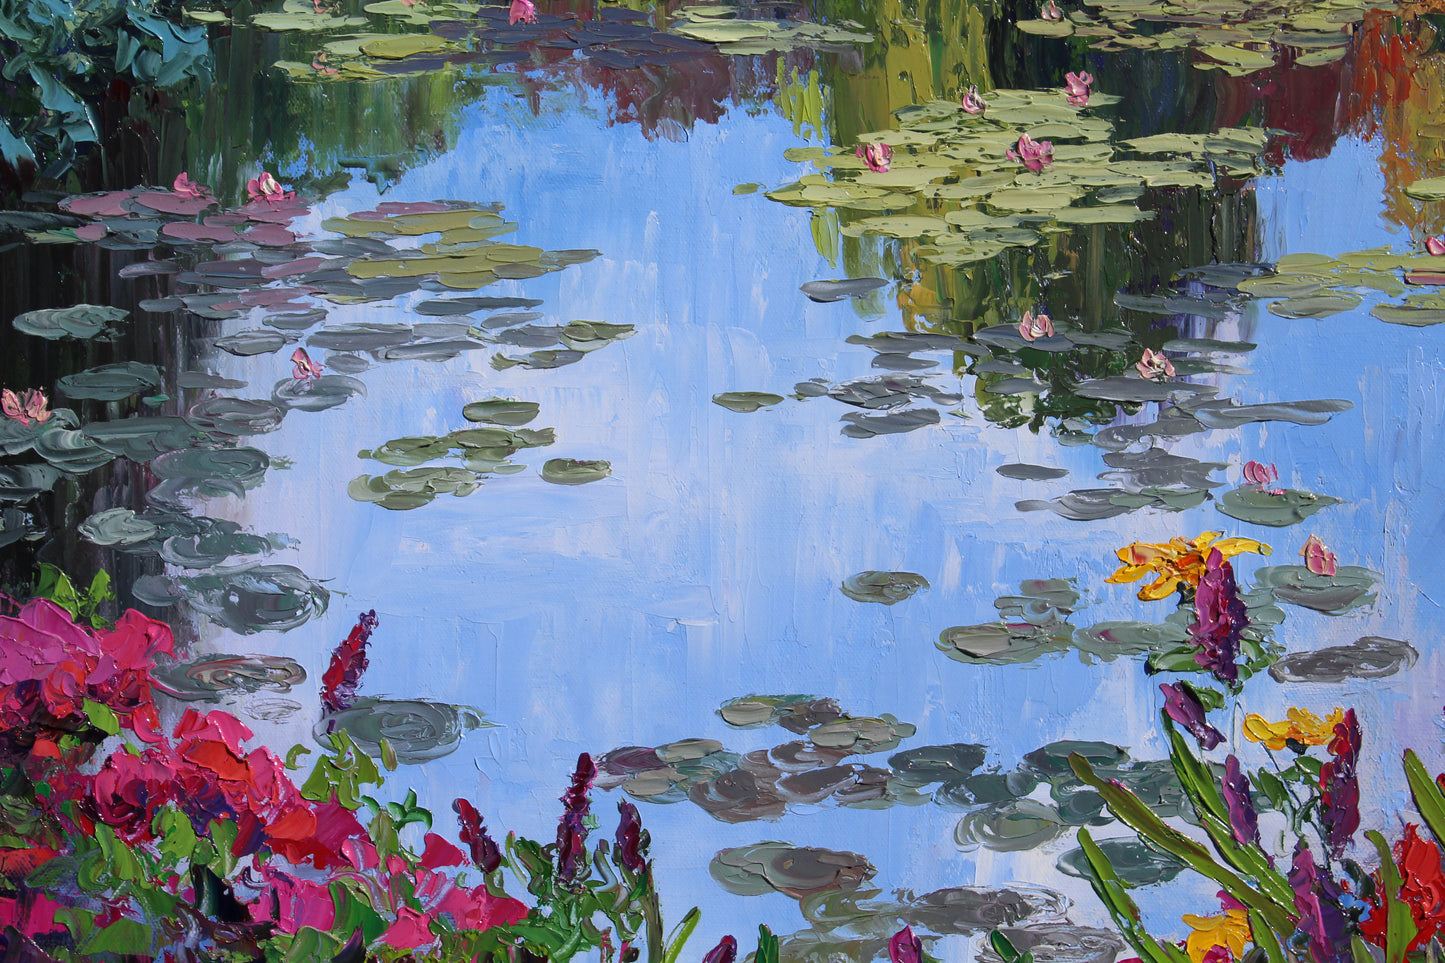 Giverny Gardens